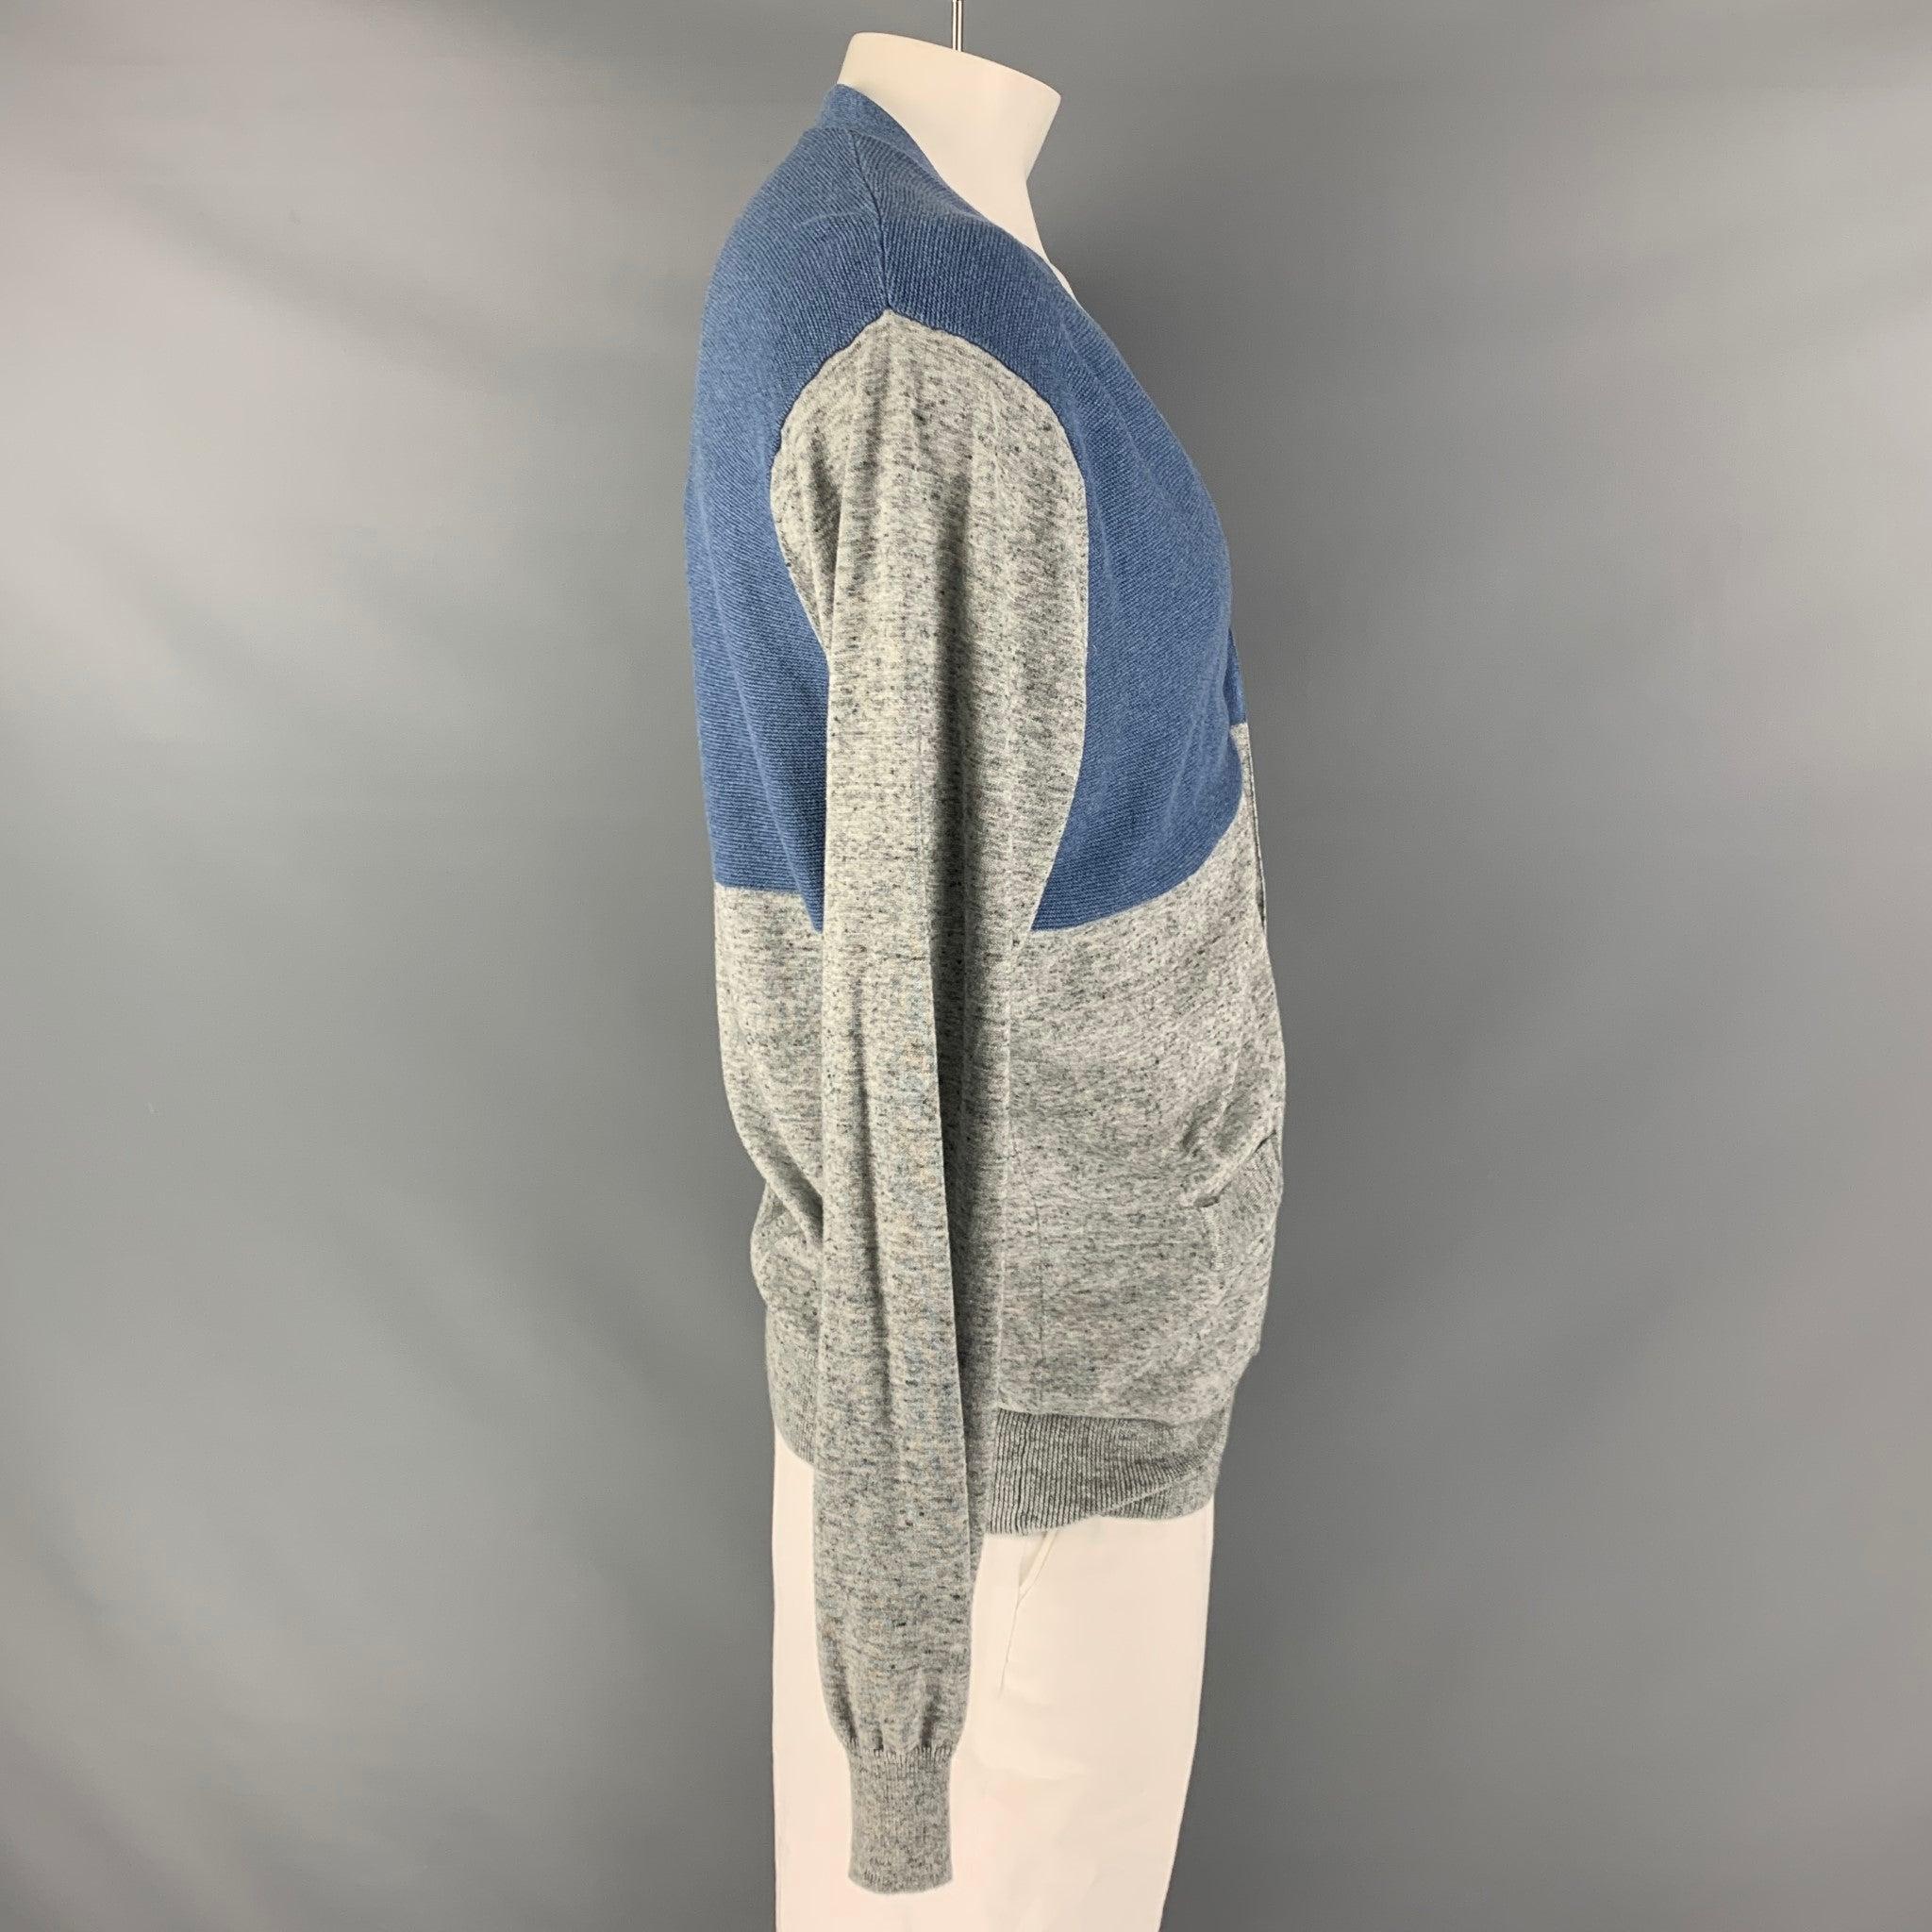 PAUL SMITH JEANS cardigan comes in a blue and grey color block cotton knit featuring a V-neck and frontal pockets. Very Good Pre-Owned Condition. 

Marked:   XL 

Measurements: 
 
Shoulder: 22 inches Chest: 50 inches Sleeve: 29 inches Length: 30